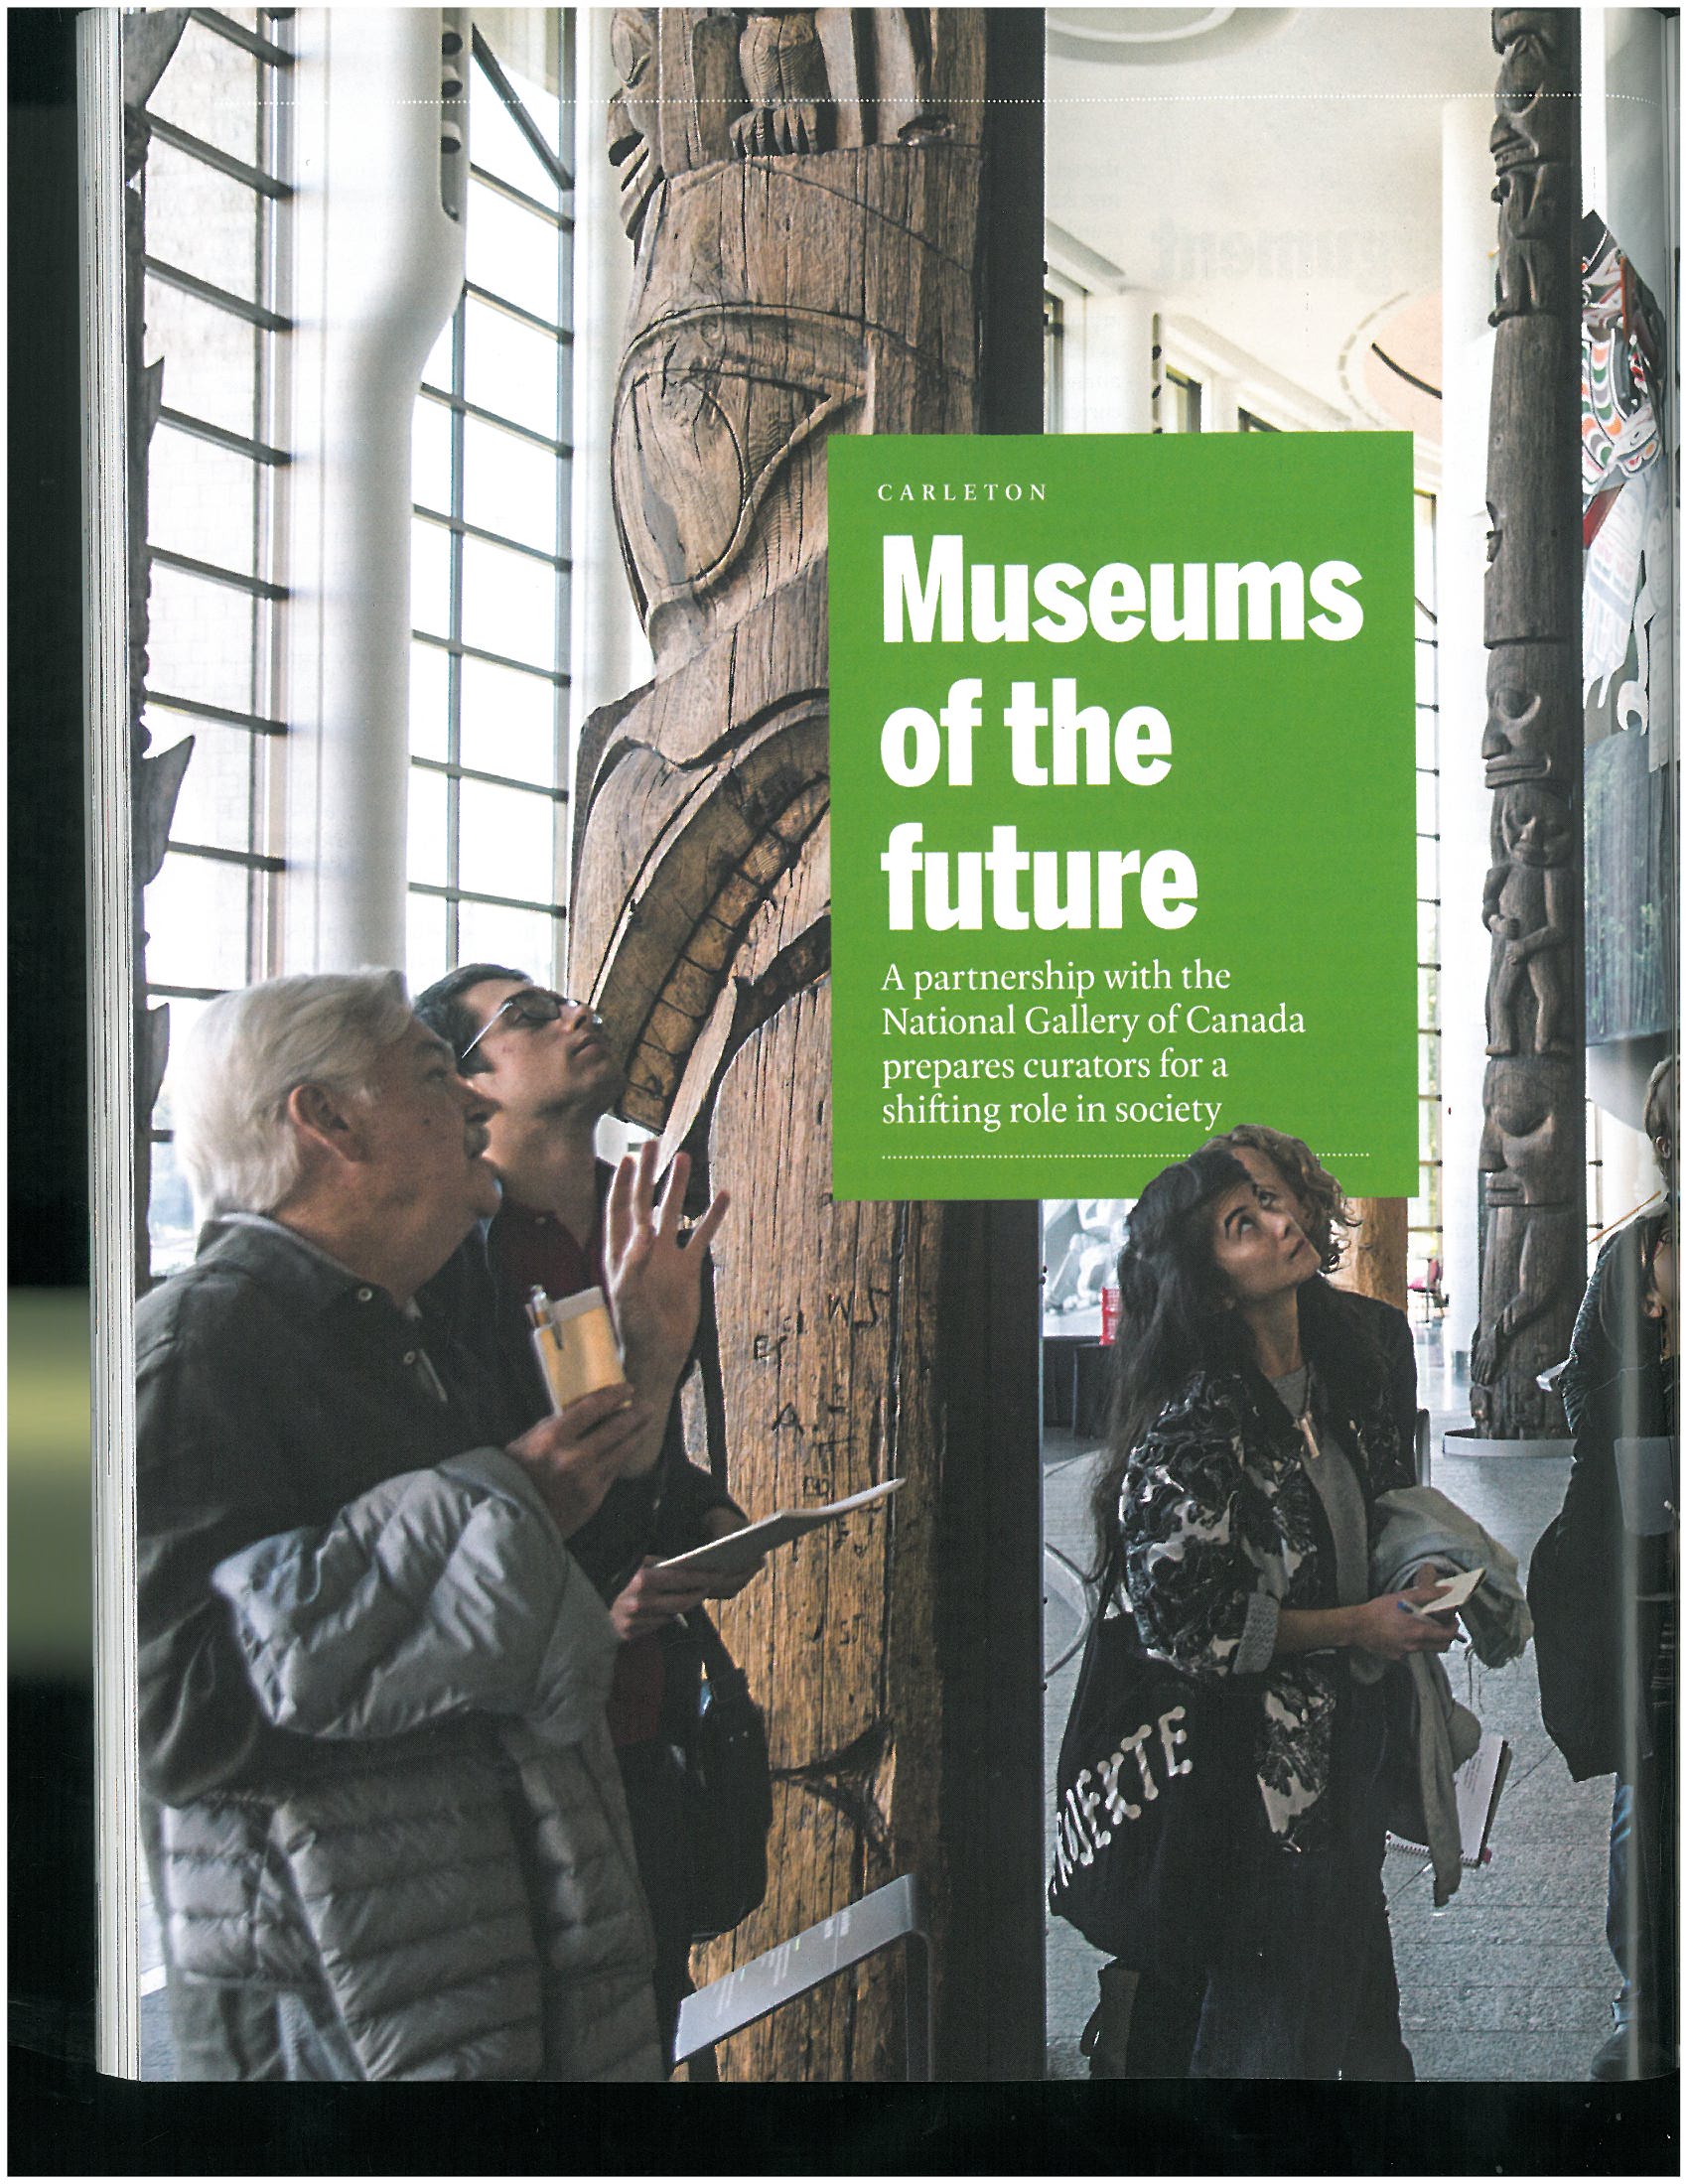 At the Museum of Civilization, Maclean's Article